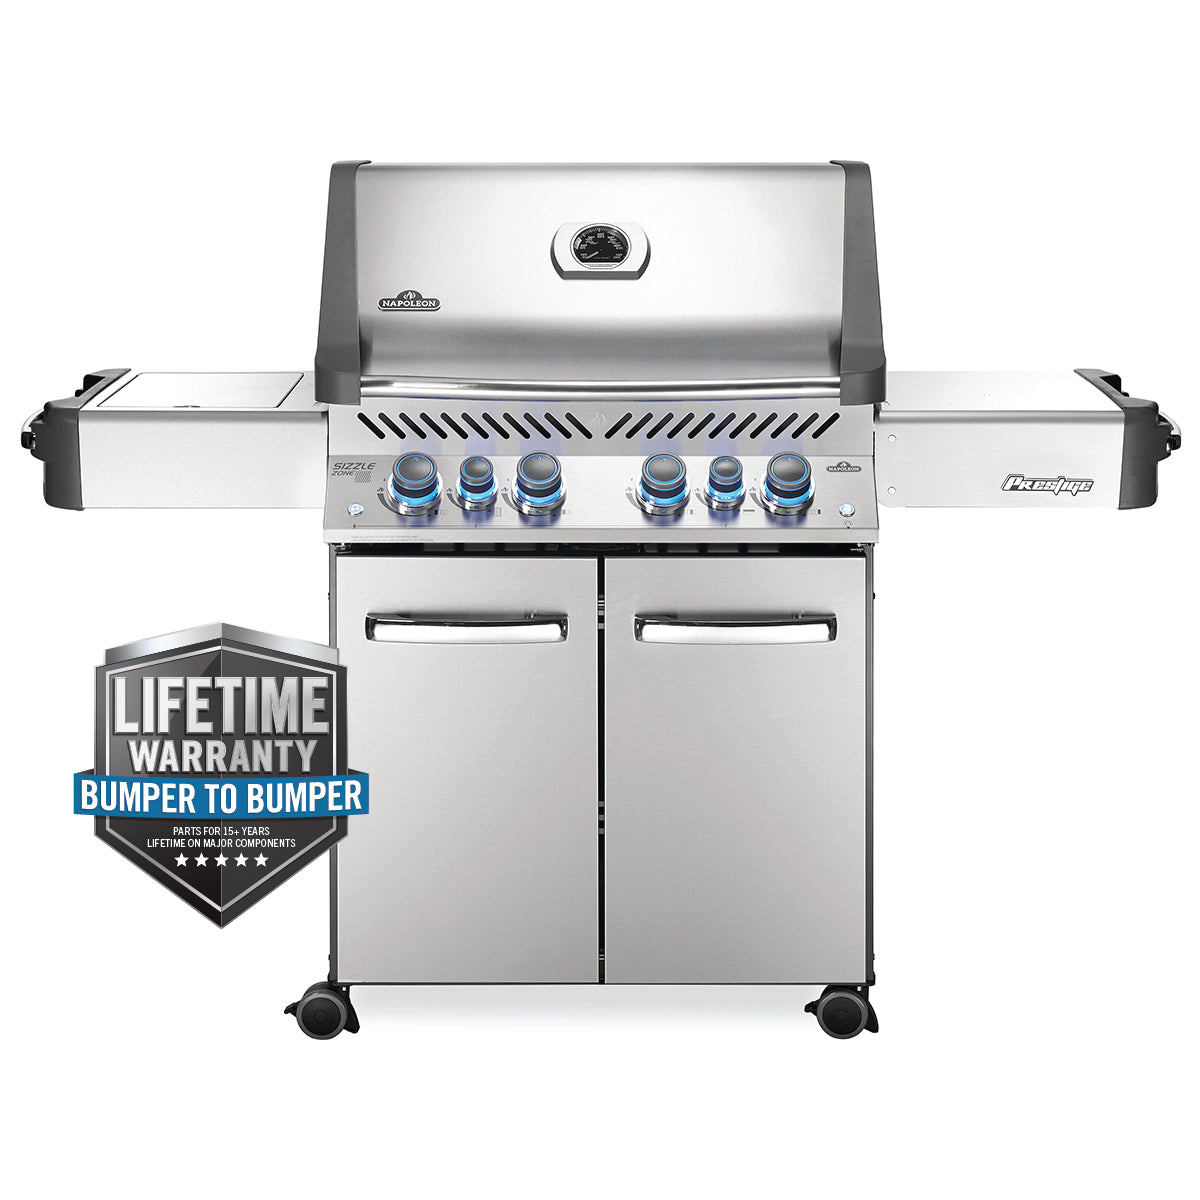 Napoleon Prestige 500 LP Gas Grill (Stainless Steel) P500RSIBPSS-3